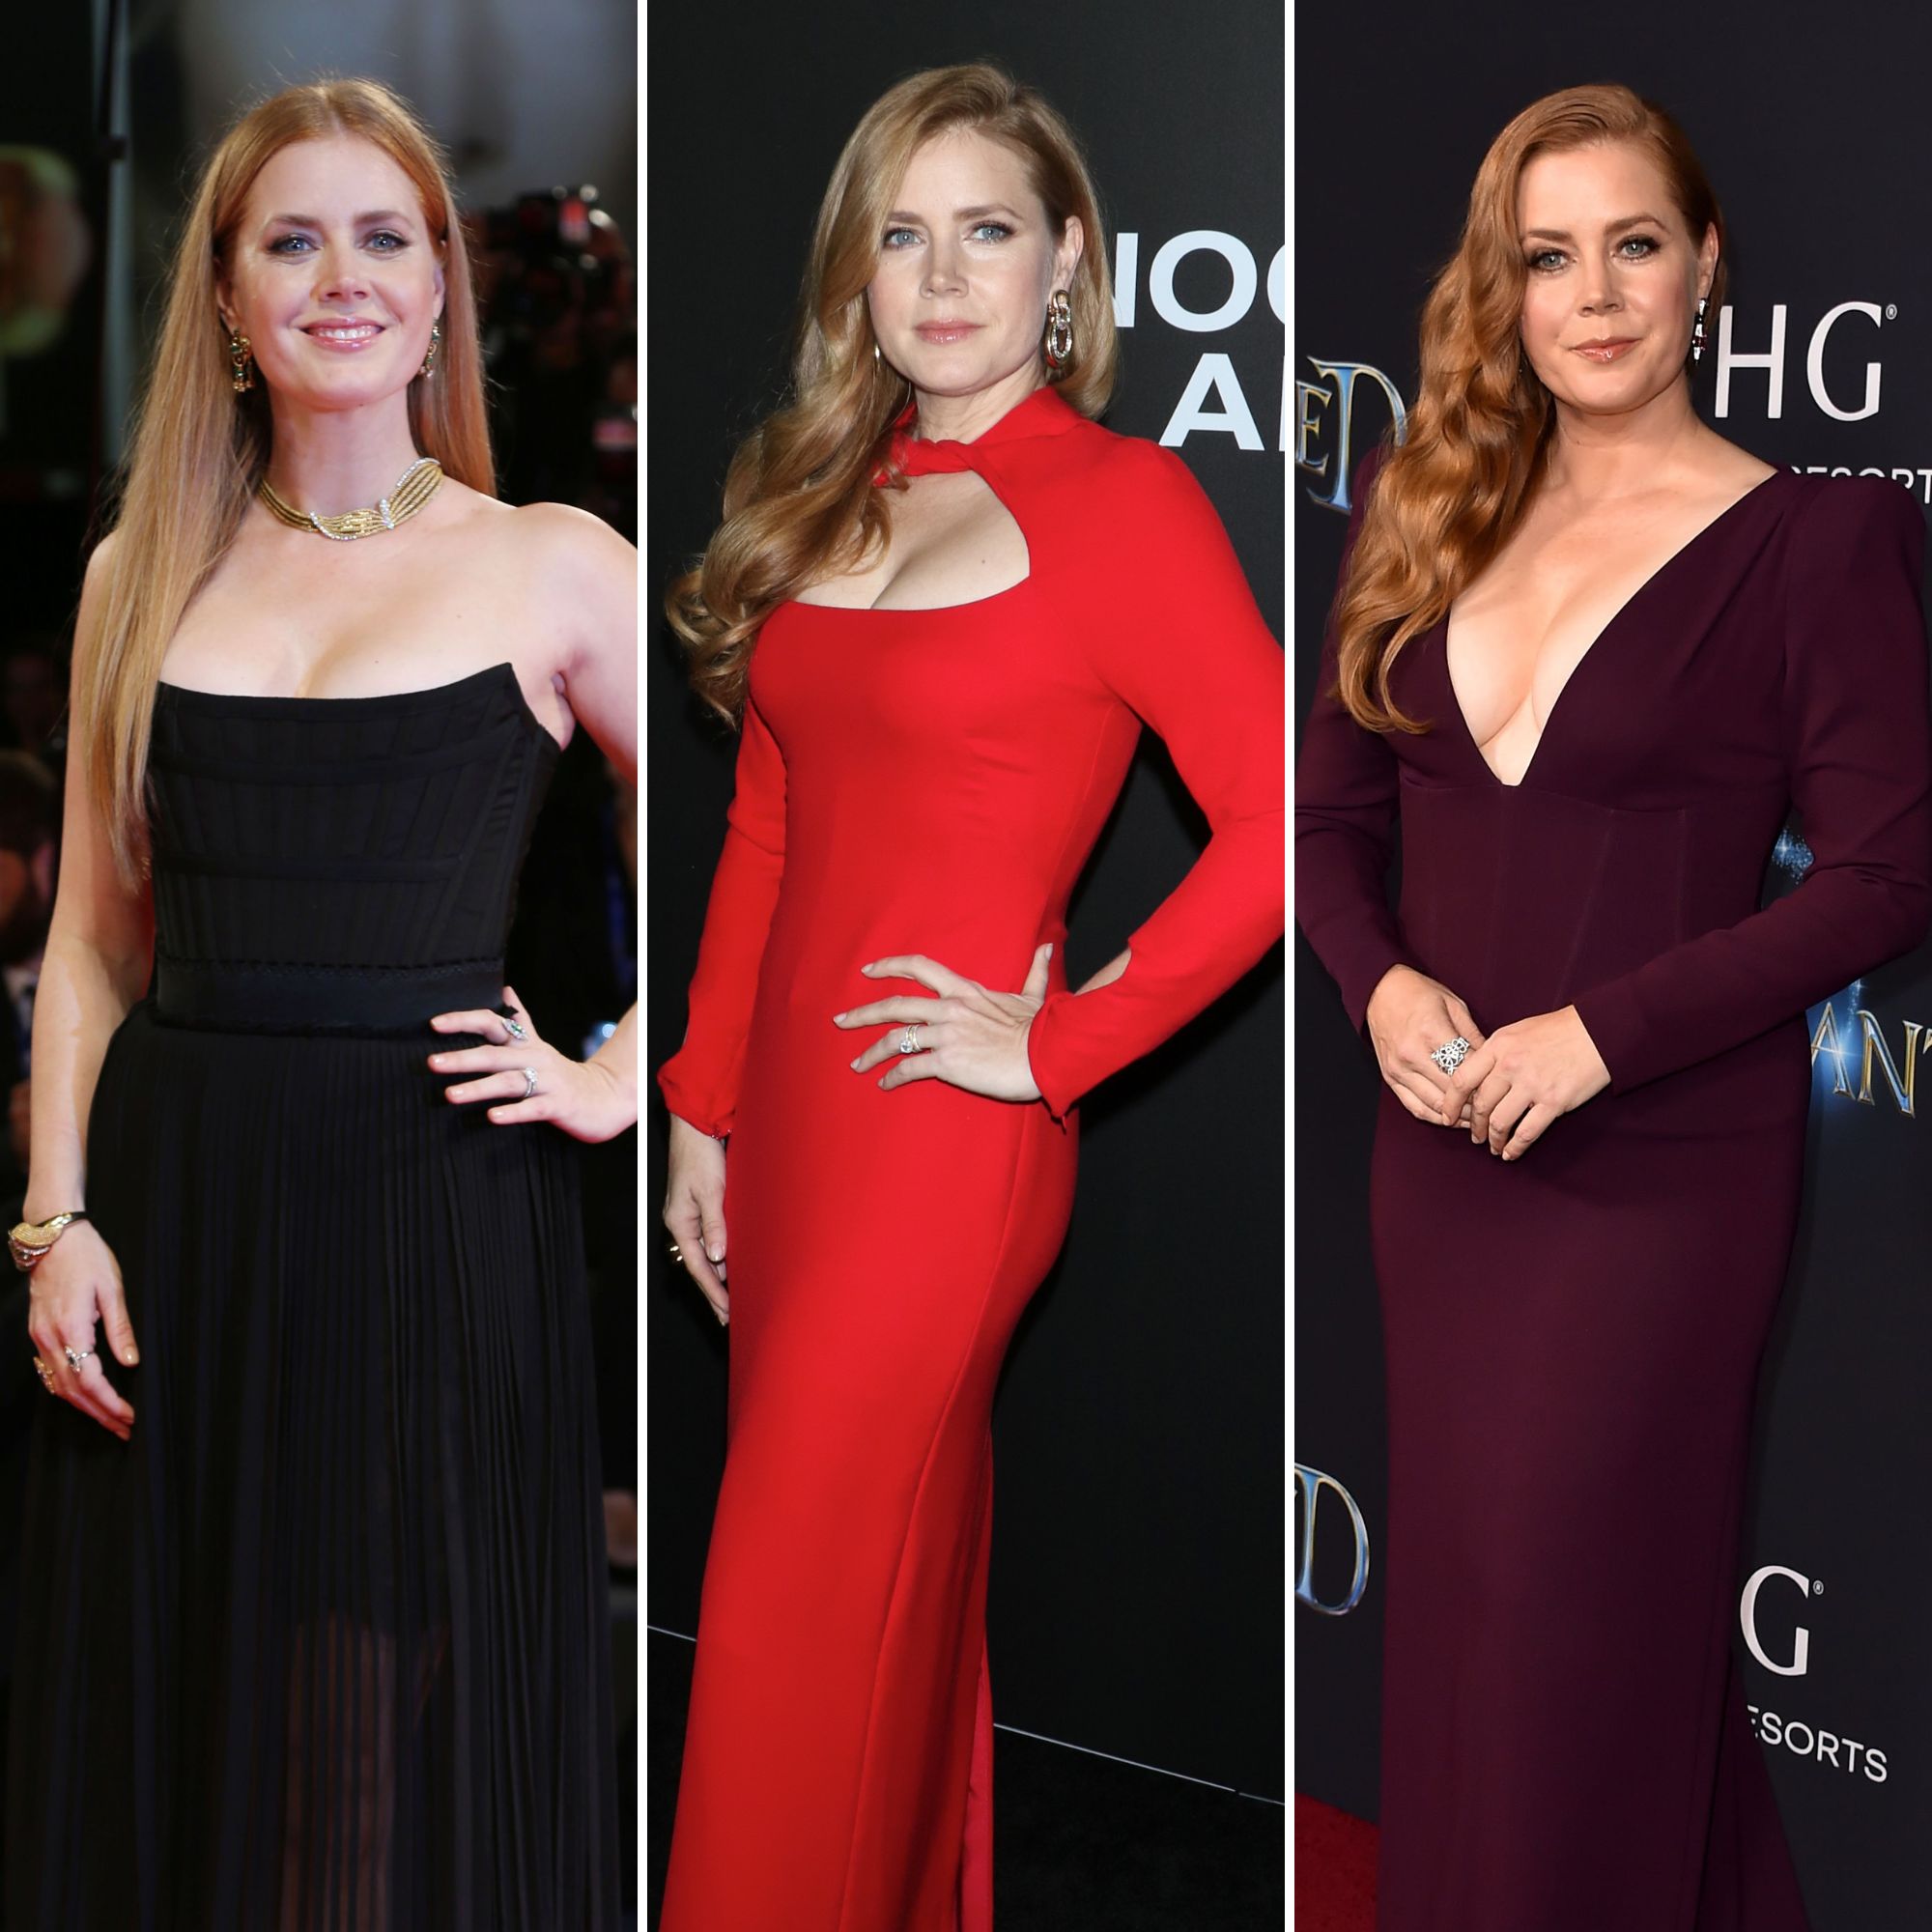 Amy Adams Braless Photos: Pictures of Actress Without a Bra